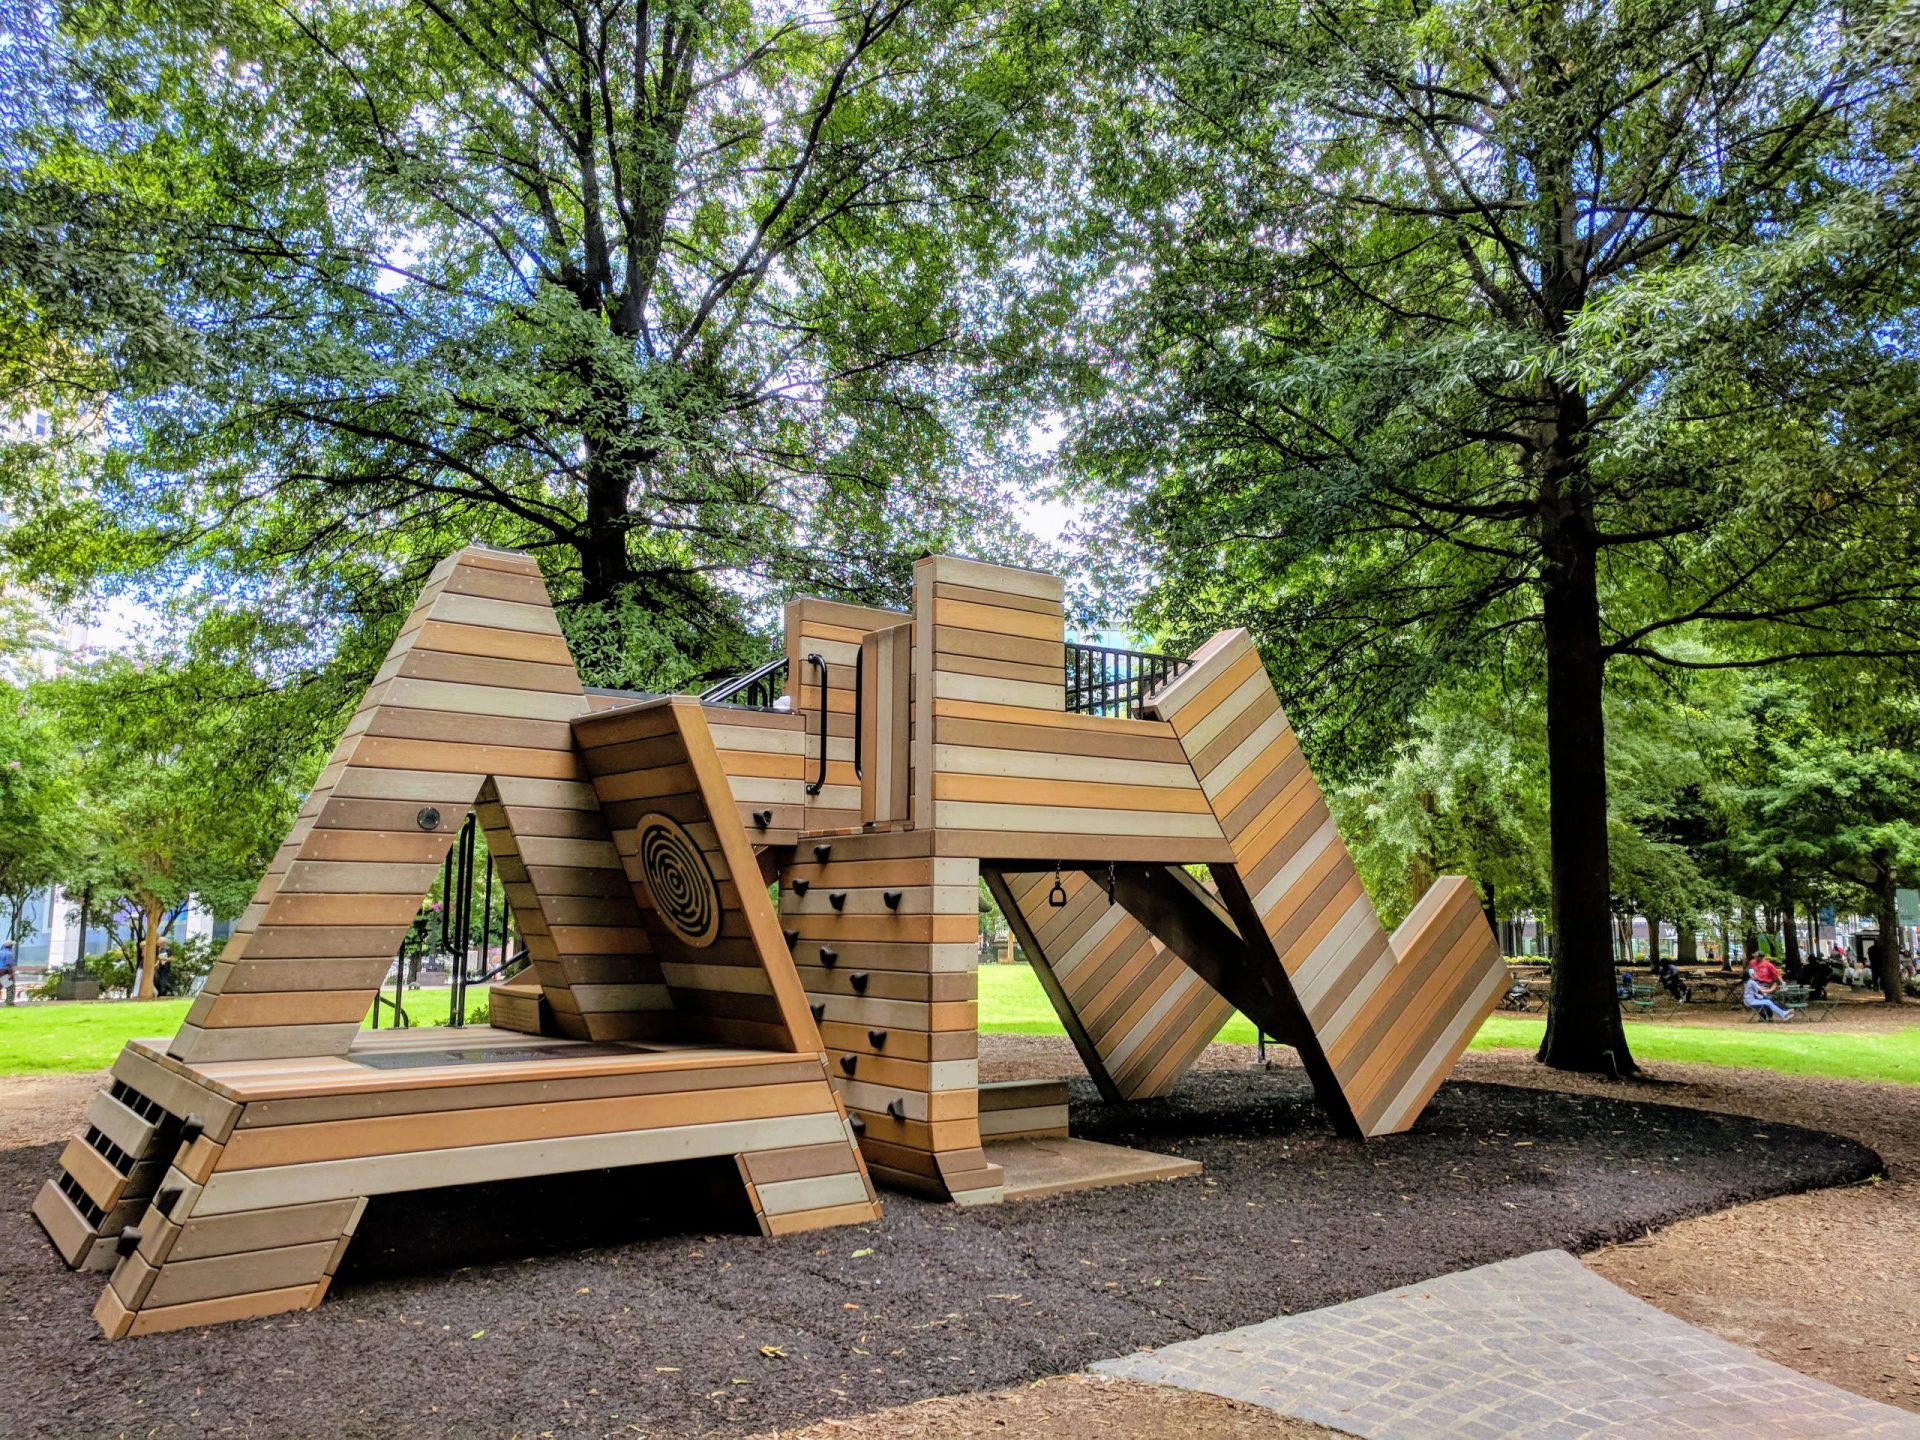 A children's playground in the shape of the capital letters ATL